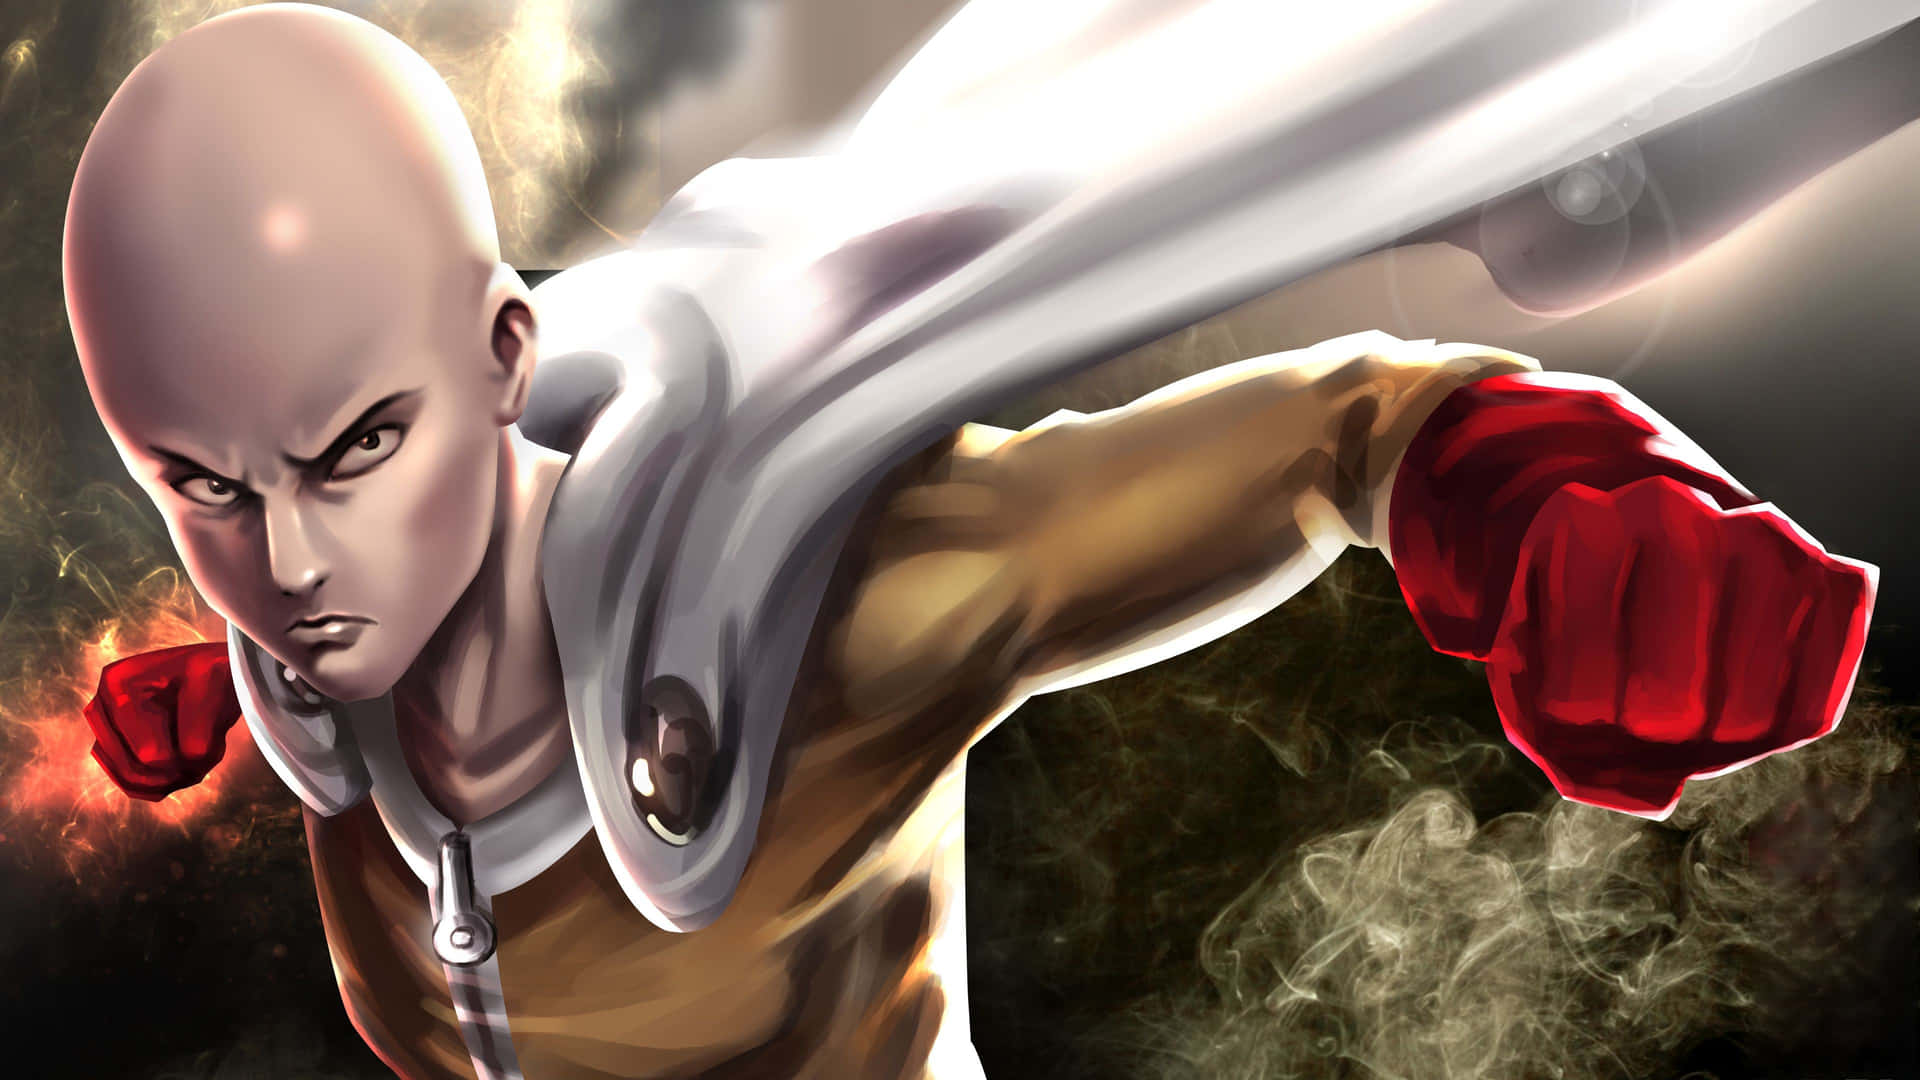 Saitama, the One Punch Man, is prepared to face any enemy!